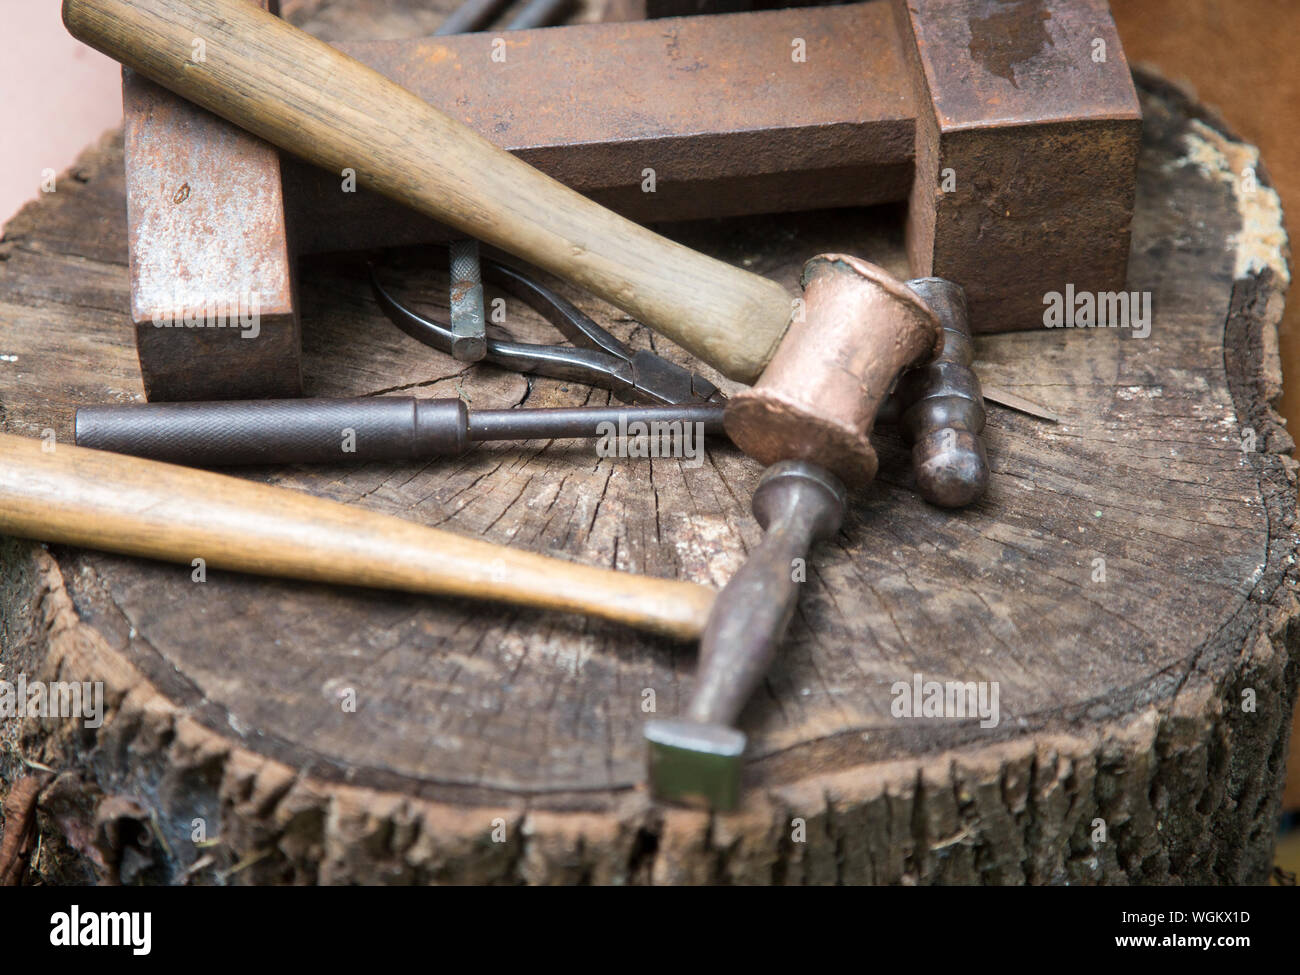 A blacksmith's hammers on a bench Stock Photo